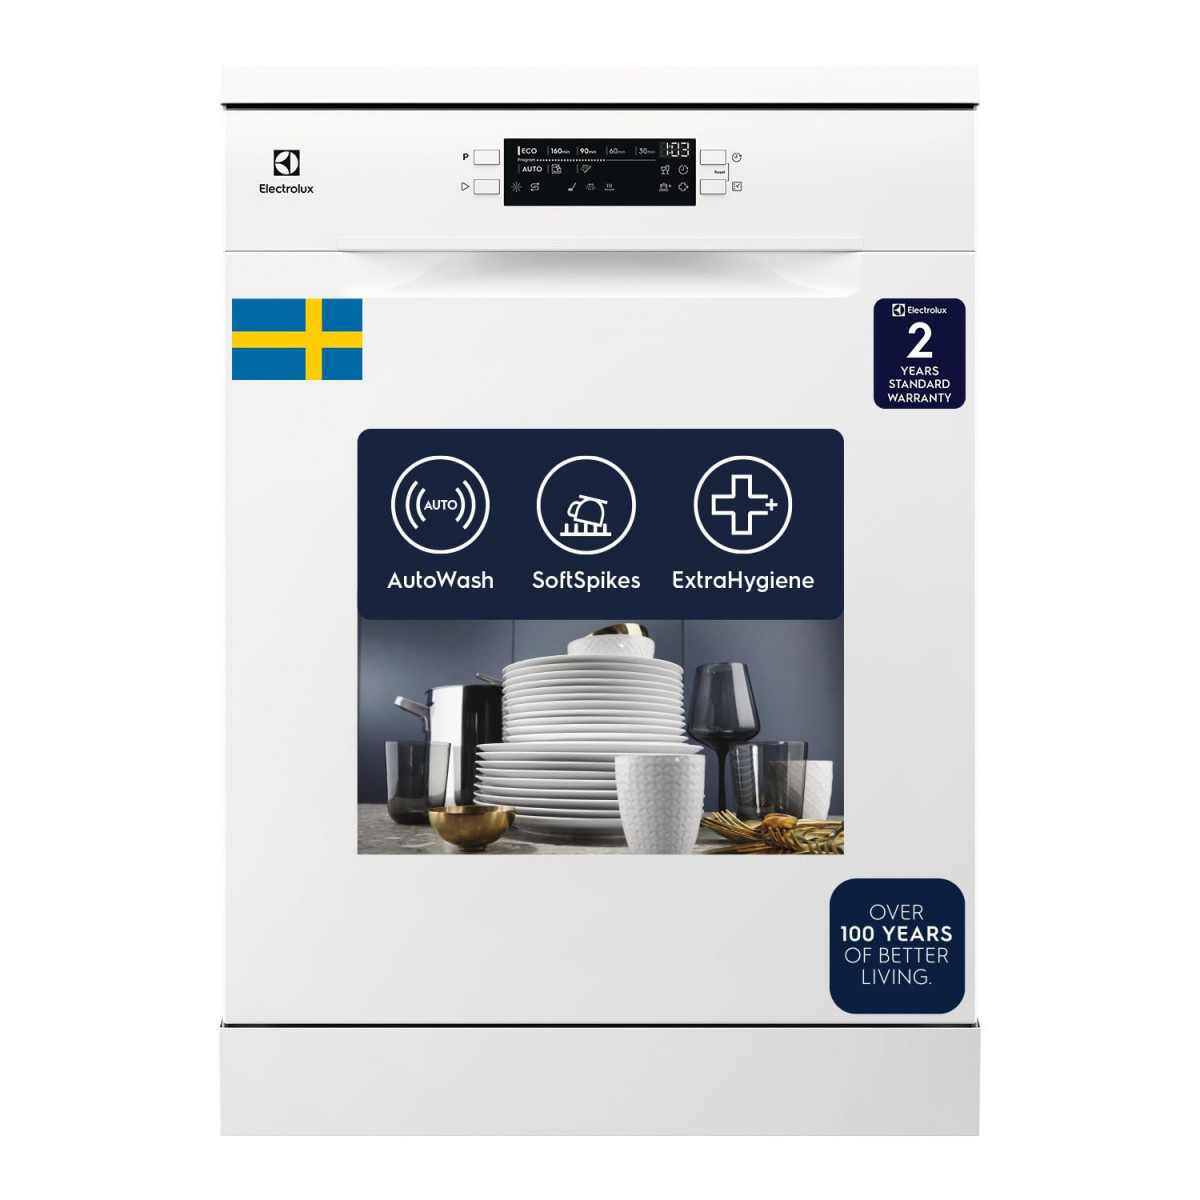 Electrolux 13 Place Settings Dishwasher Machine for Home Fully Automatic with AirDry In-Built Heater White